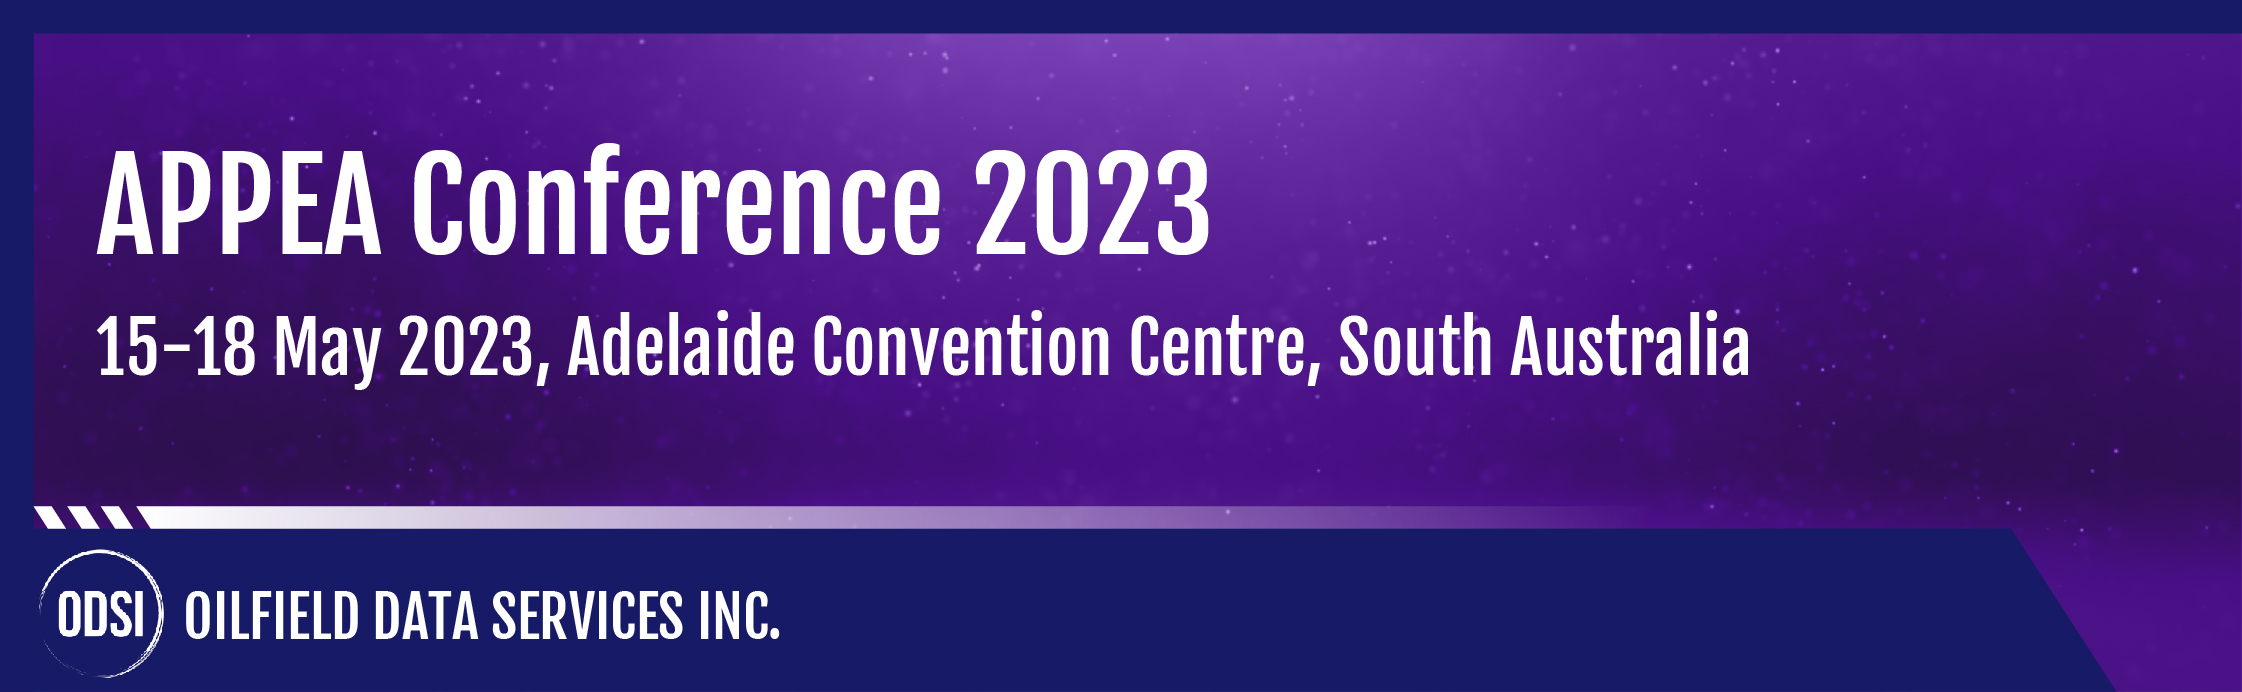 APPEA Conference 2023